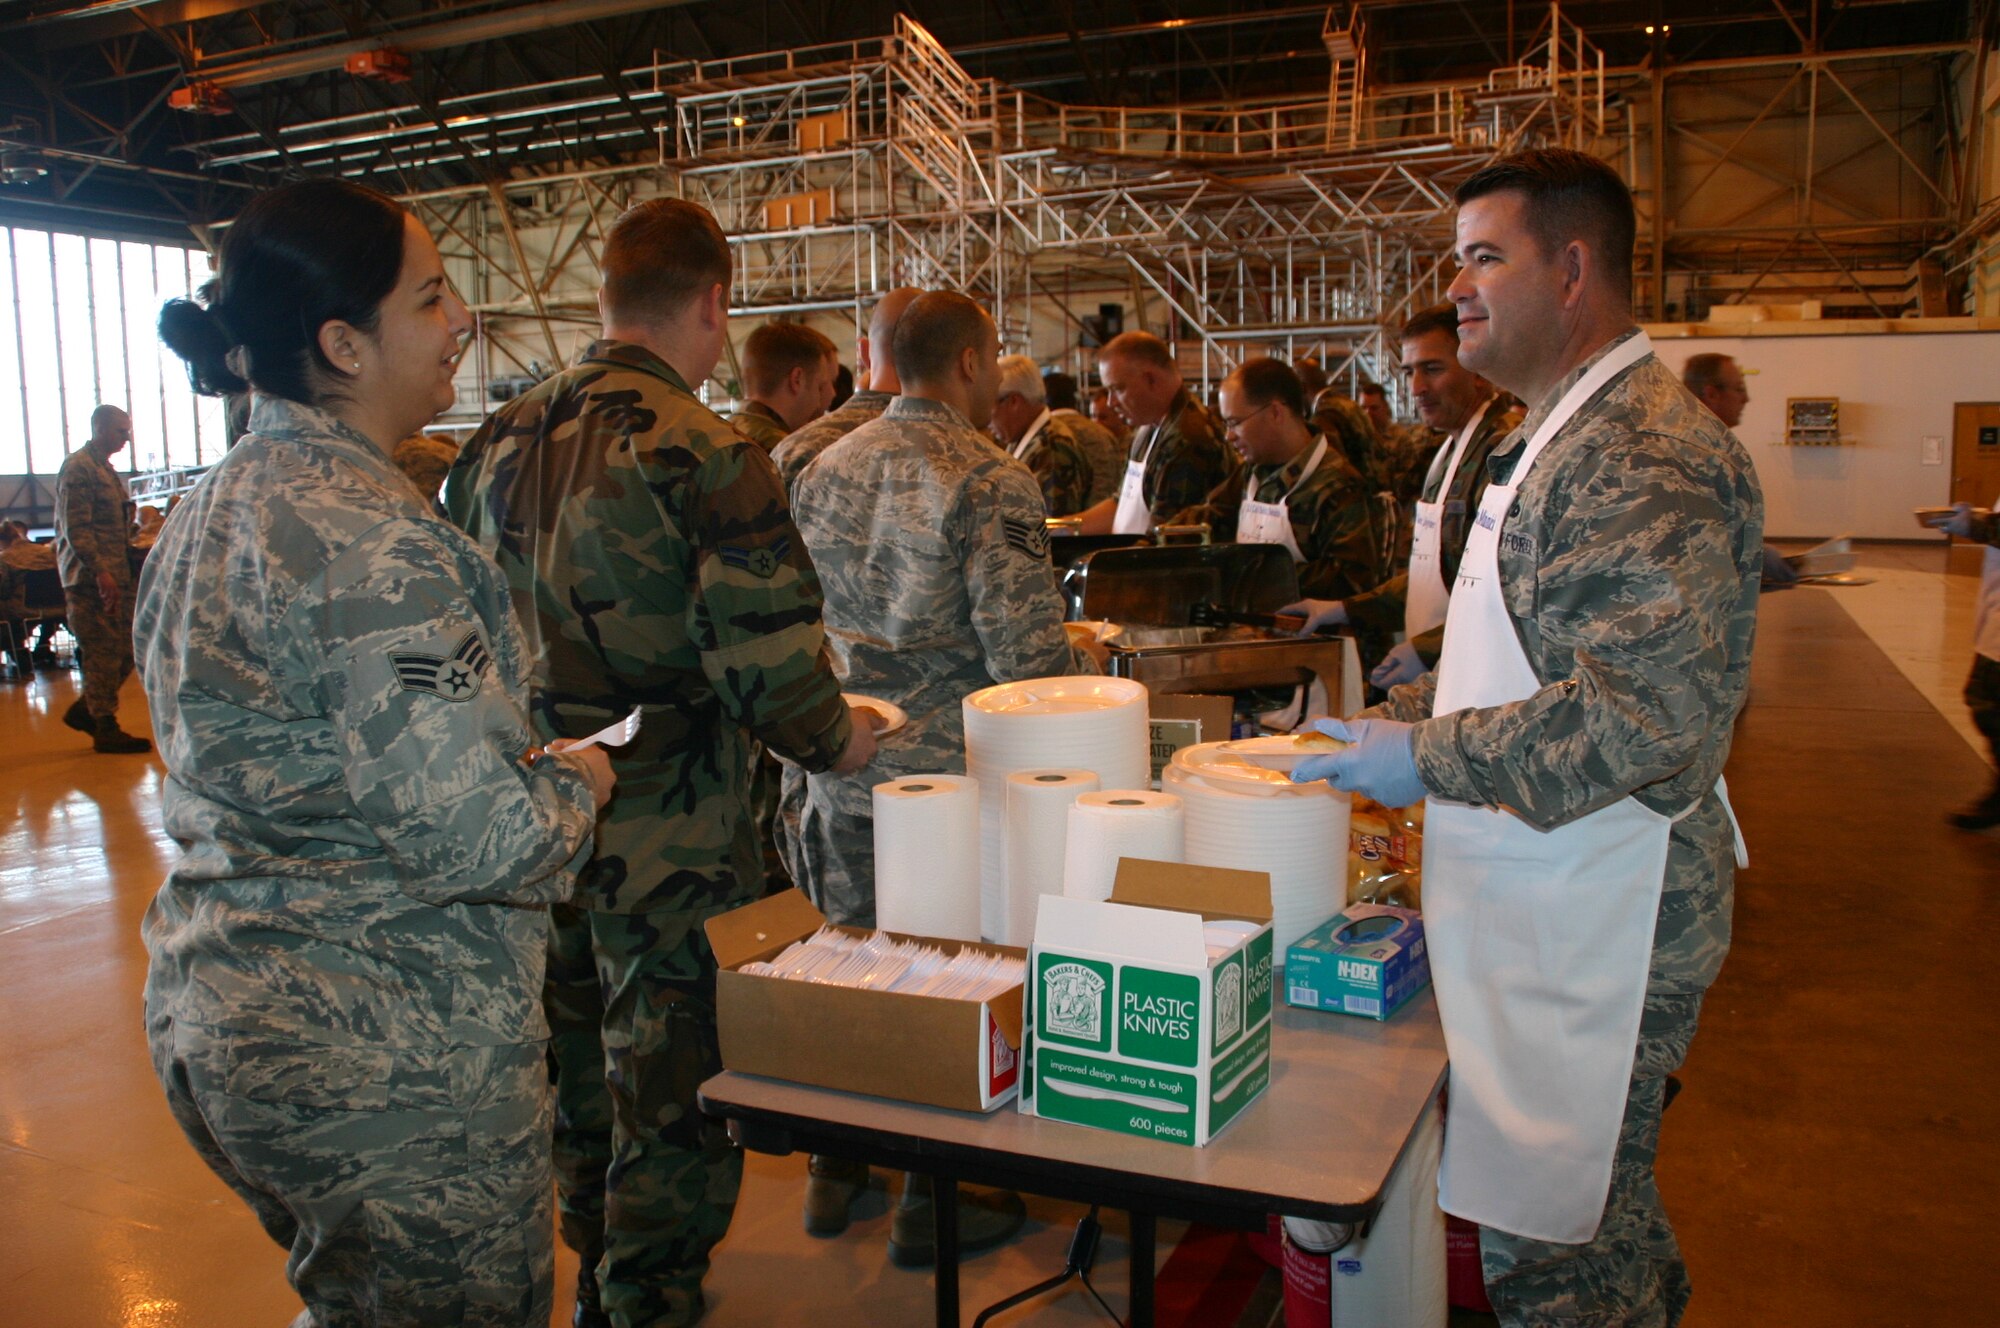 Maj. Dwight Minnick, commander, 552nd Maintenance Operations Squadron starts off the MXG Turkey Feast by handing out plates and bread rolls. Photo compliments of 1st Lt. Kinder Blacke.